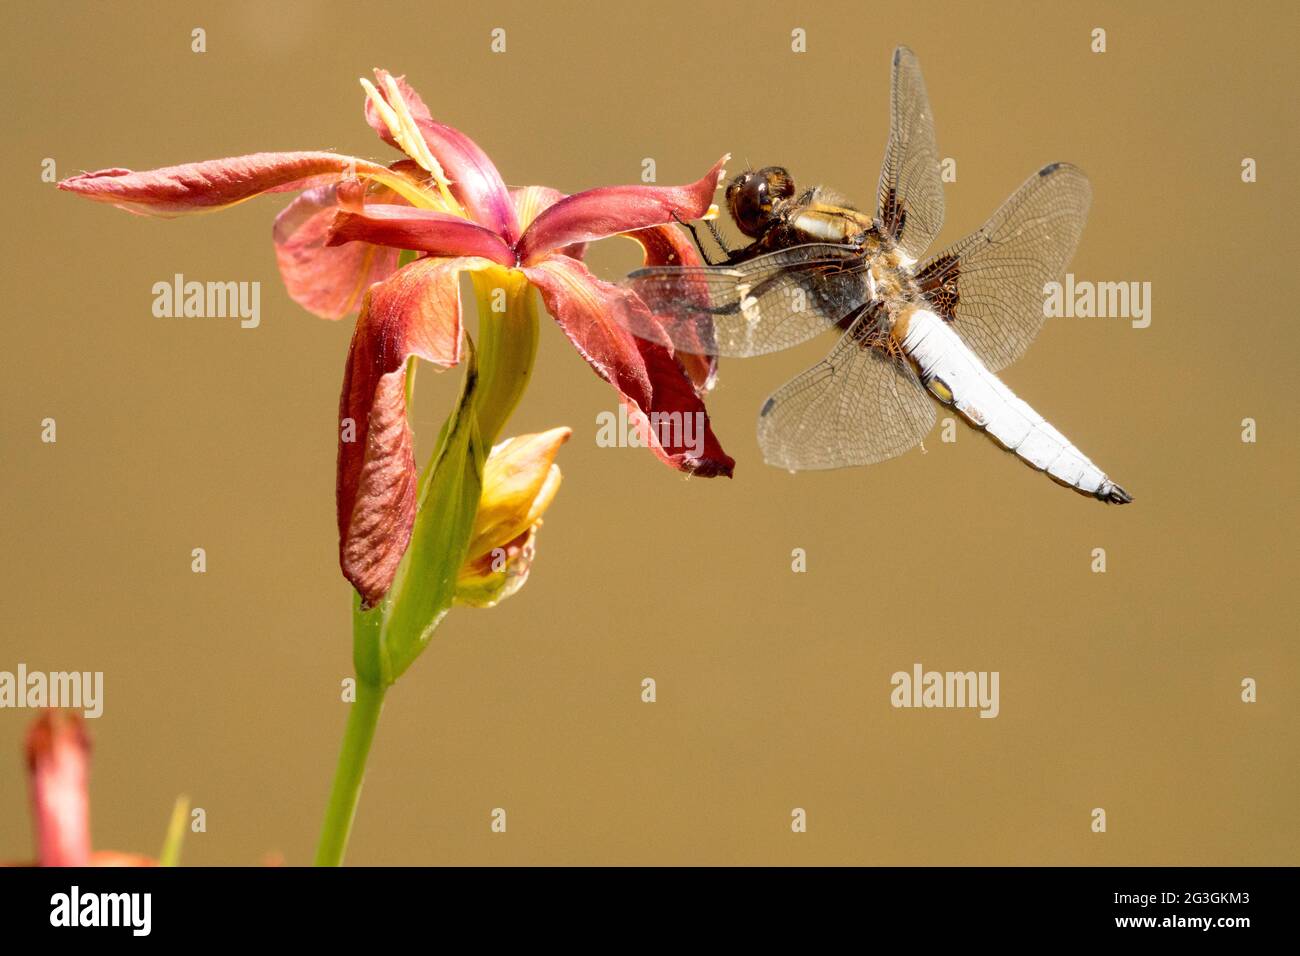 Dragonfly Male Libellula depressa, the broad-bodied chaser or broad-bodied darter on Louisiana Iris 'Little Cajun' close up terracotta red flower Stock Photo